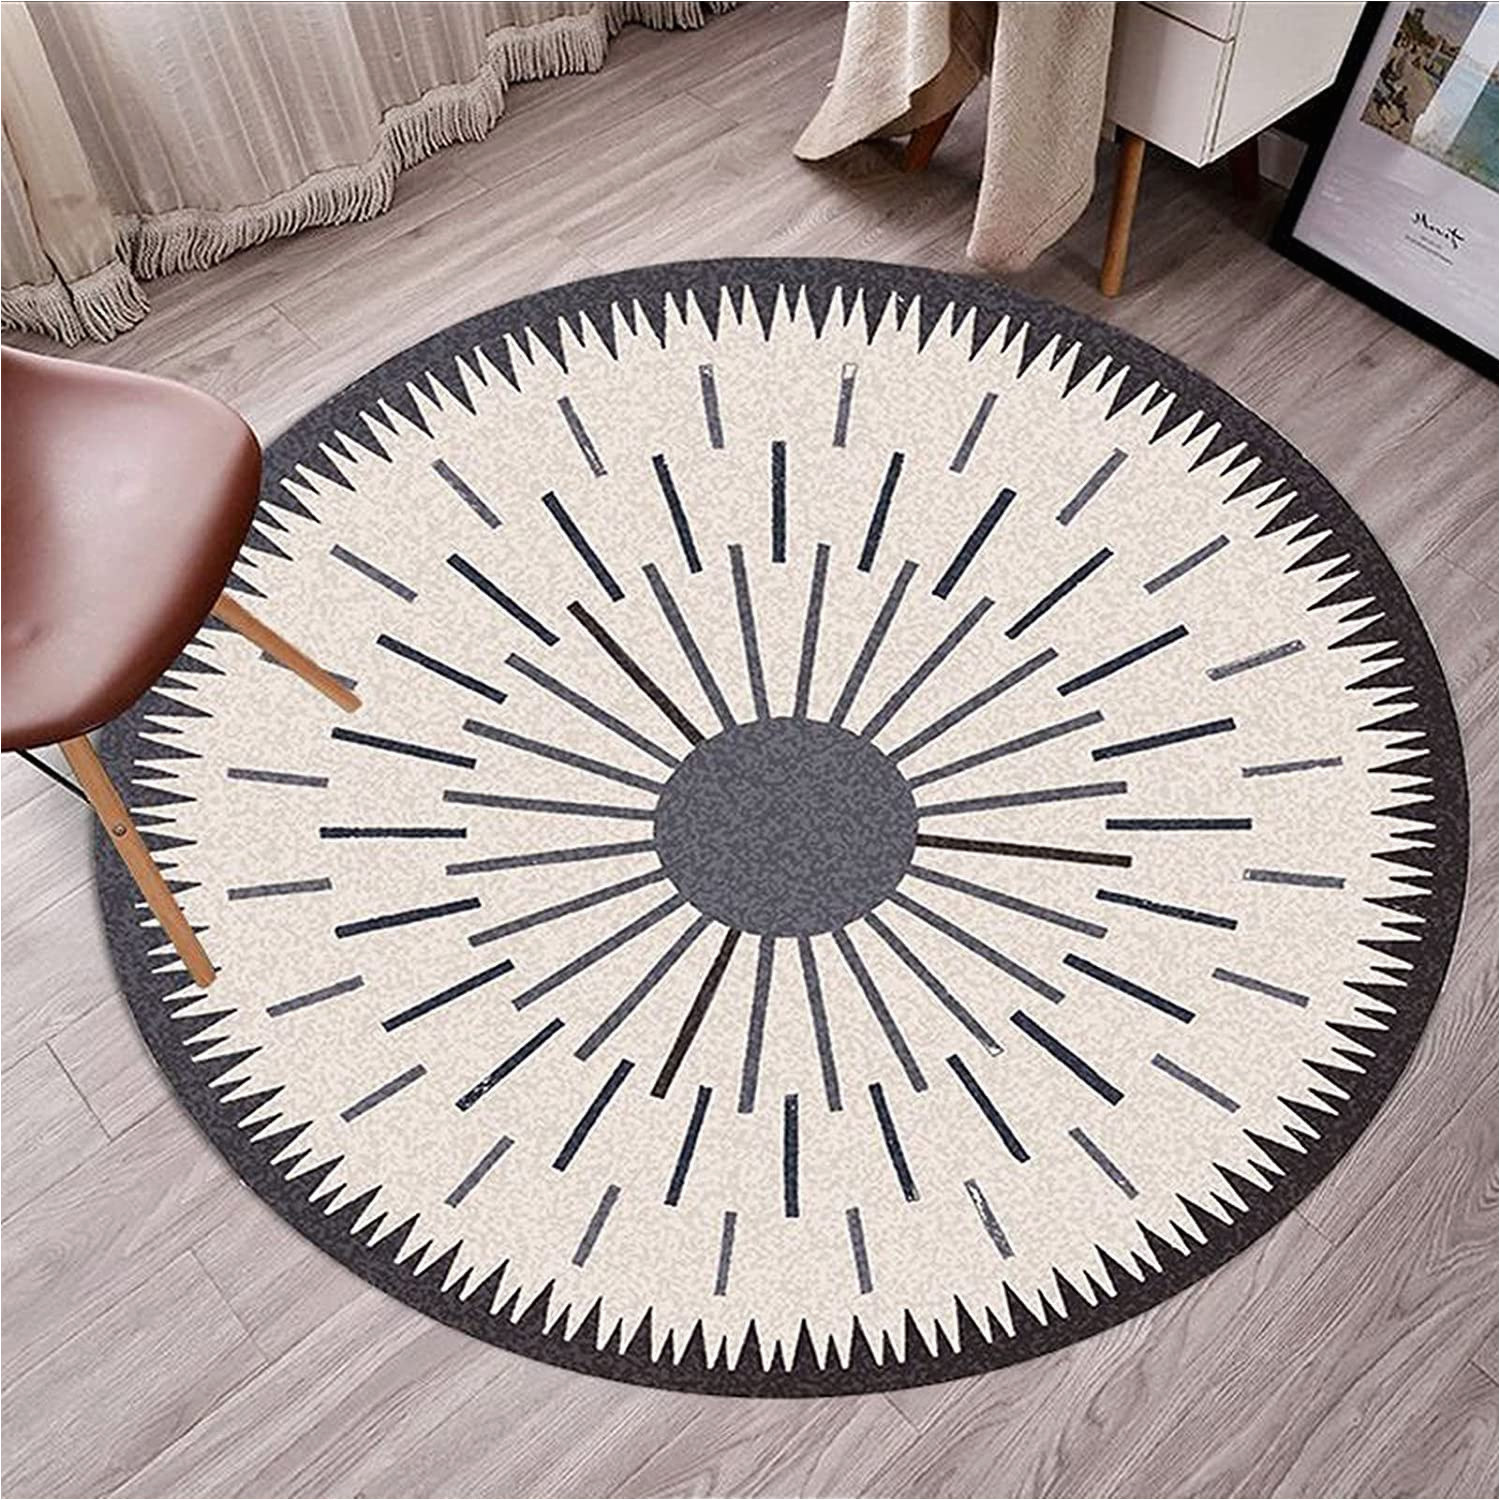 Indoor Outdoor Round area Rugs Drsff nordic area Rugs Round Rug for Living Room Bedroom Bedside …